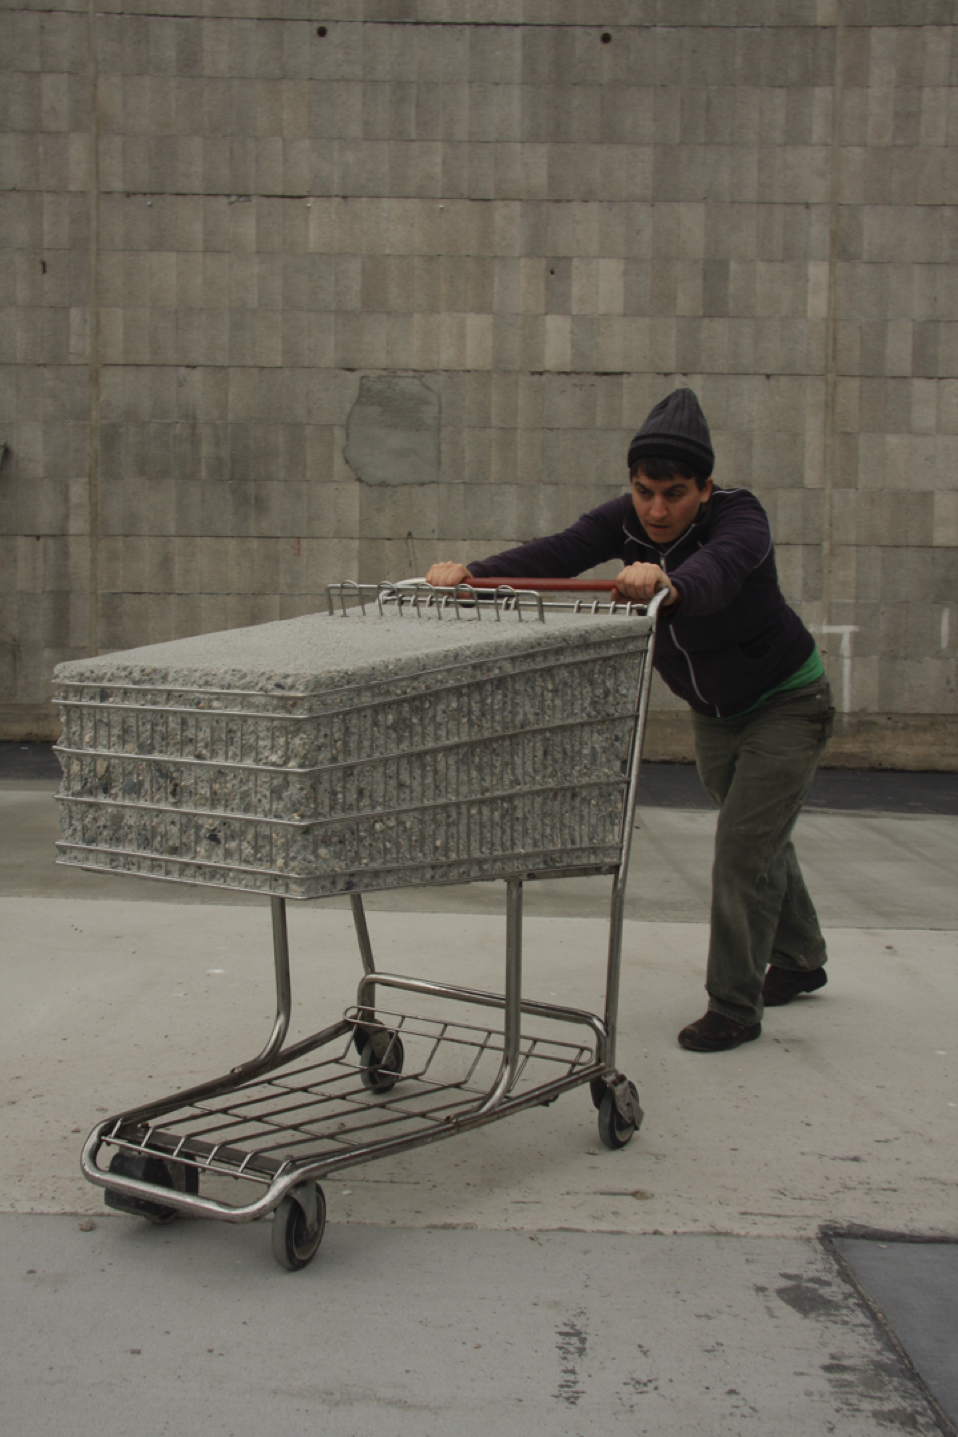 A man poses with "Smart and Final," a sculpture of a shopping cart filled with concrete, by pretending to push the cart. The sculpture is a manifestation of the weight of consumerism. (Photo courtesy of Terry Berlier)